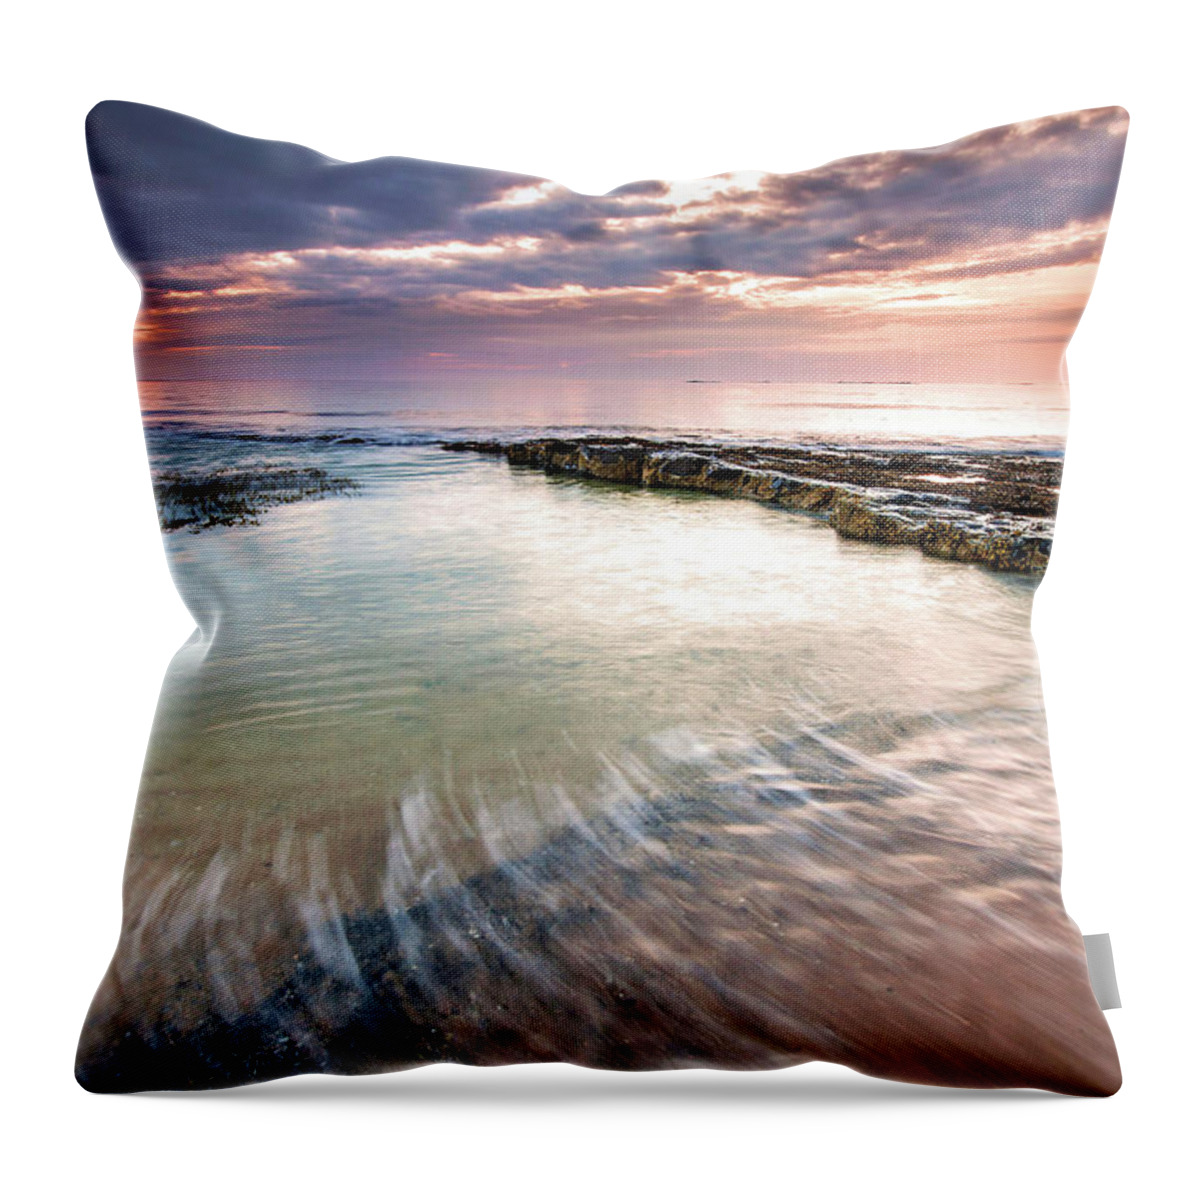 Tranquility Throw Pillow featuring the photograph North Sea Sunrise by Paul Bullen